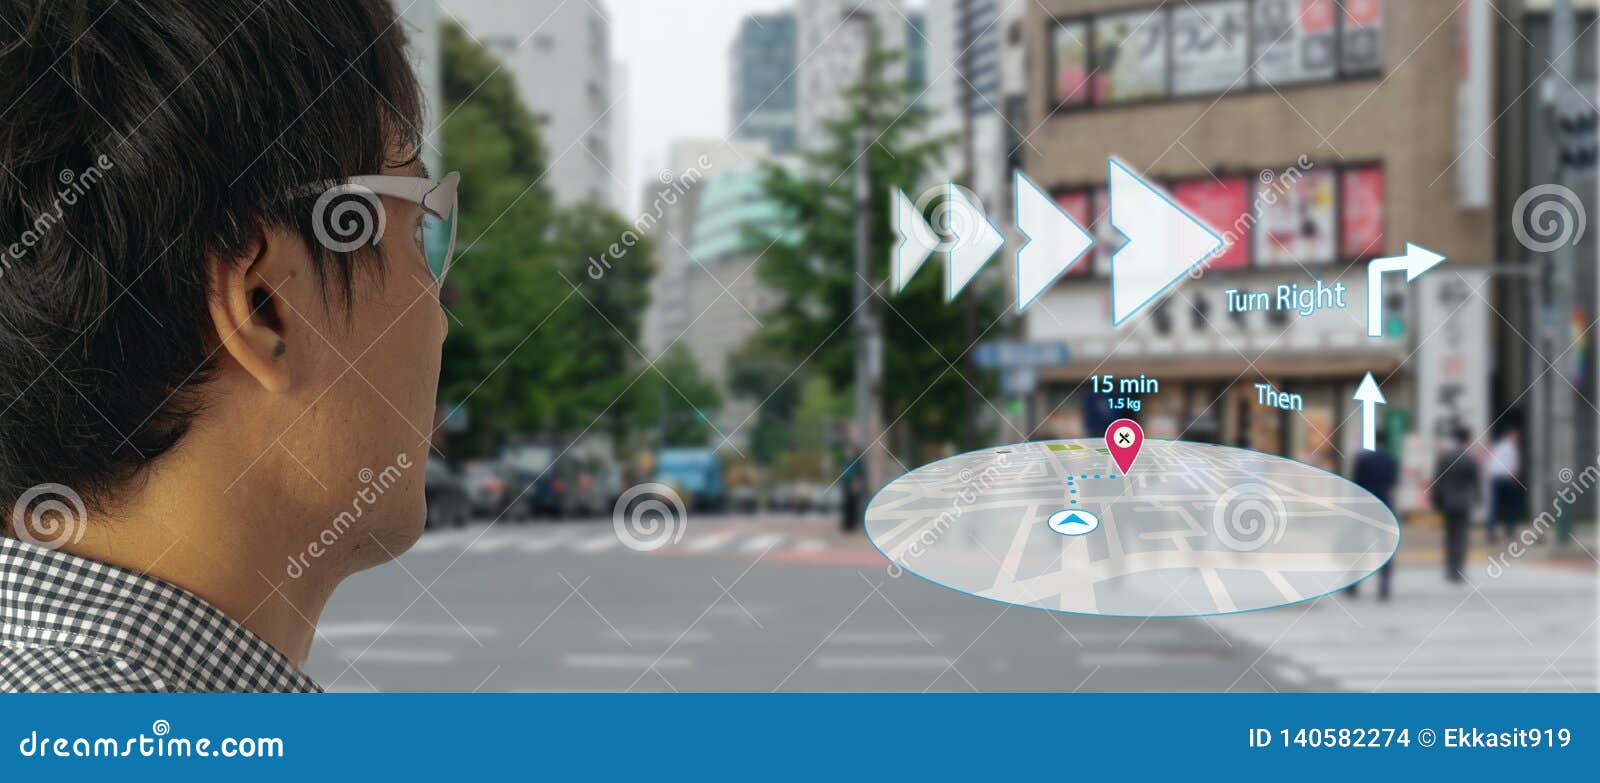 map use ai, artificial intelligence algorithms to determine what individuals want to see when gps location service are turned on a